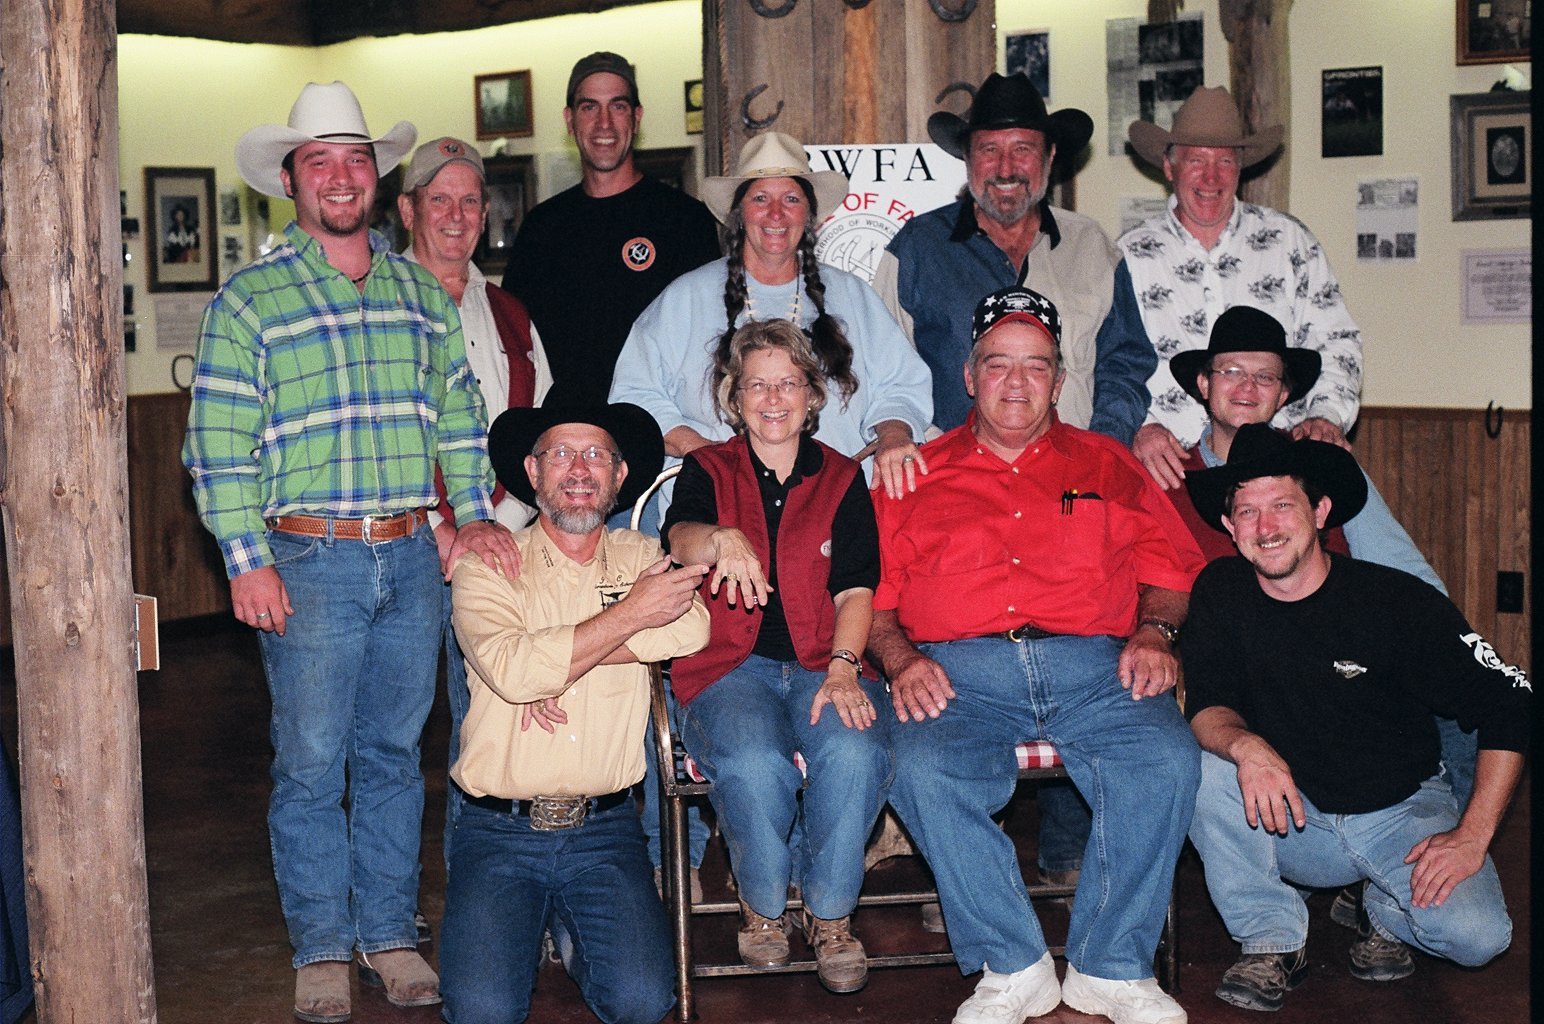 Hall of Fame members with new member John Marino of Texas, 2004 Convention. Billy and Kathy Fortner with everyone smiling on..jpg